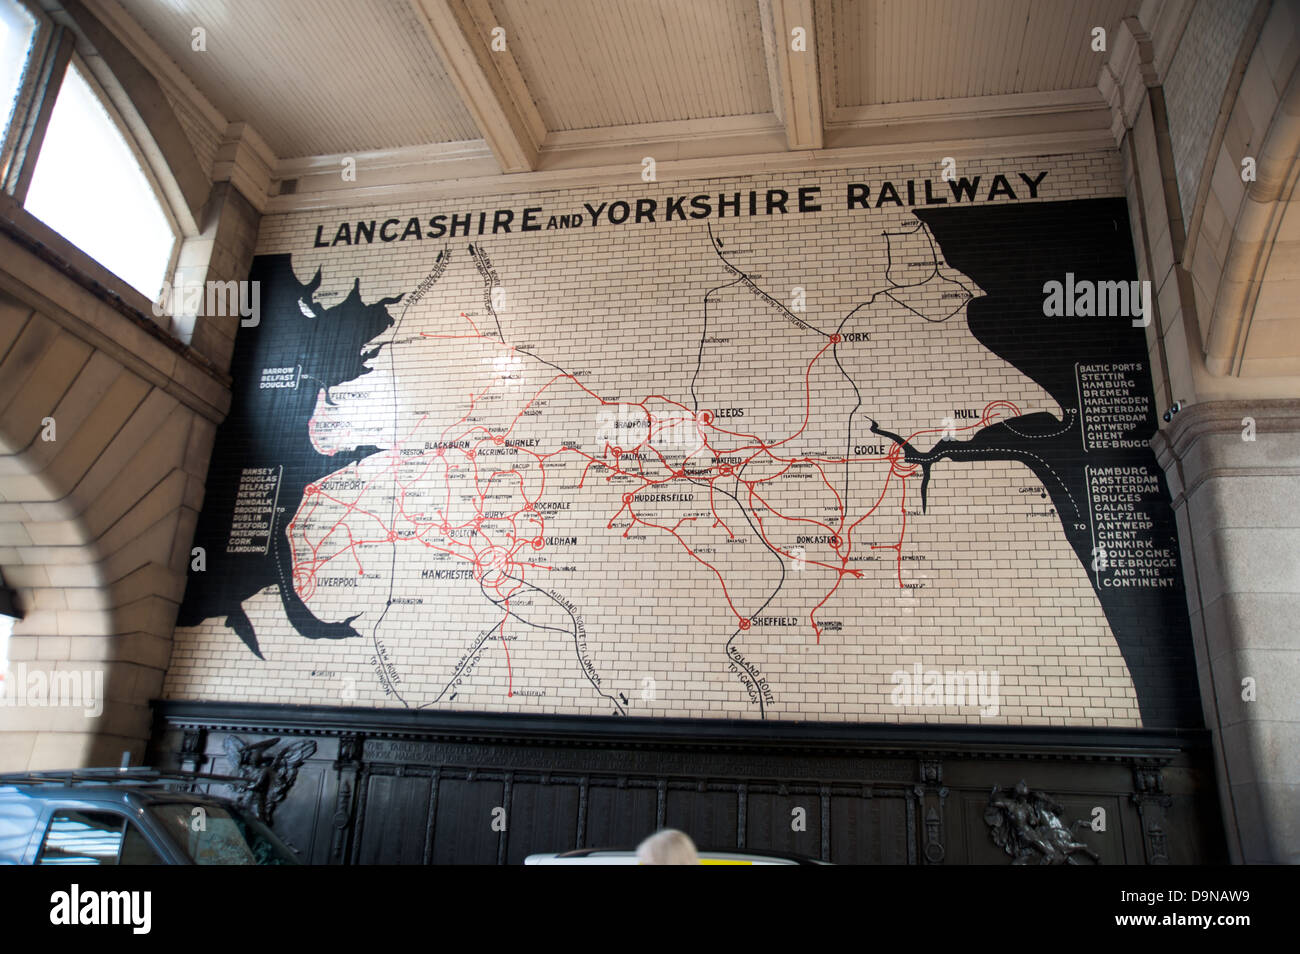 Historic tiled map showing the old Lancashire and Yorkshire railway network, Manchester Victoria Station Stock Photo